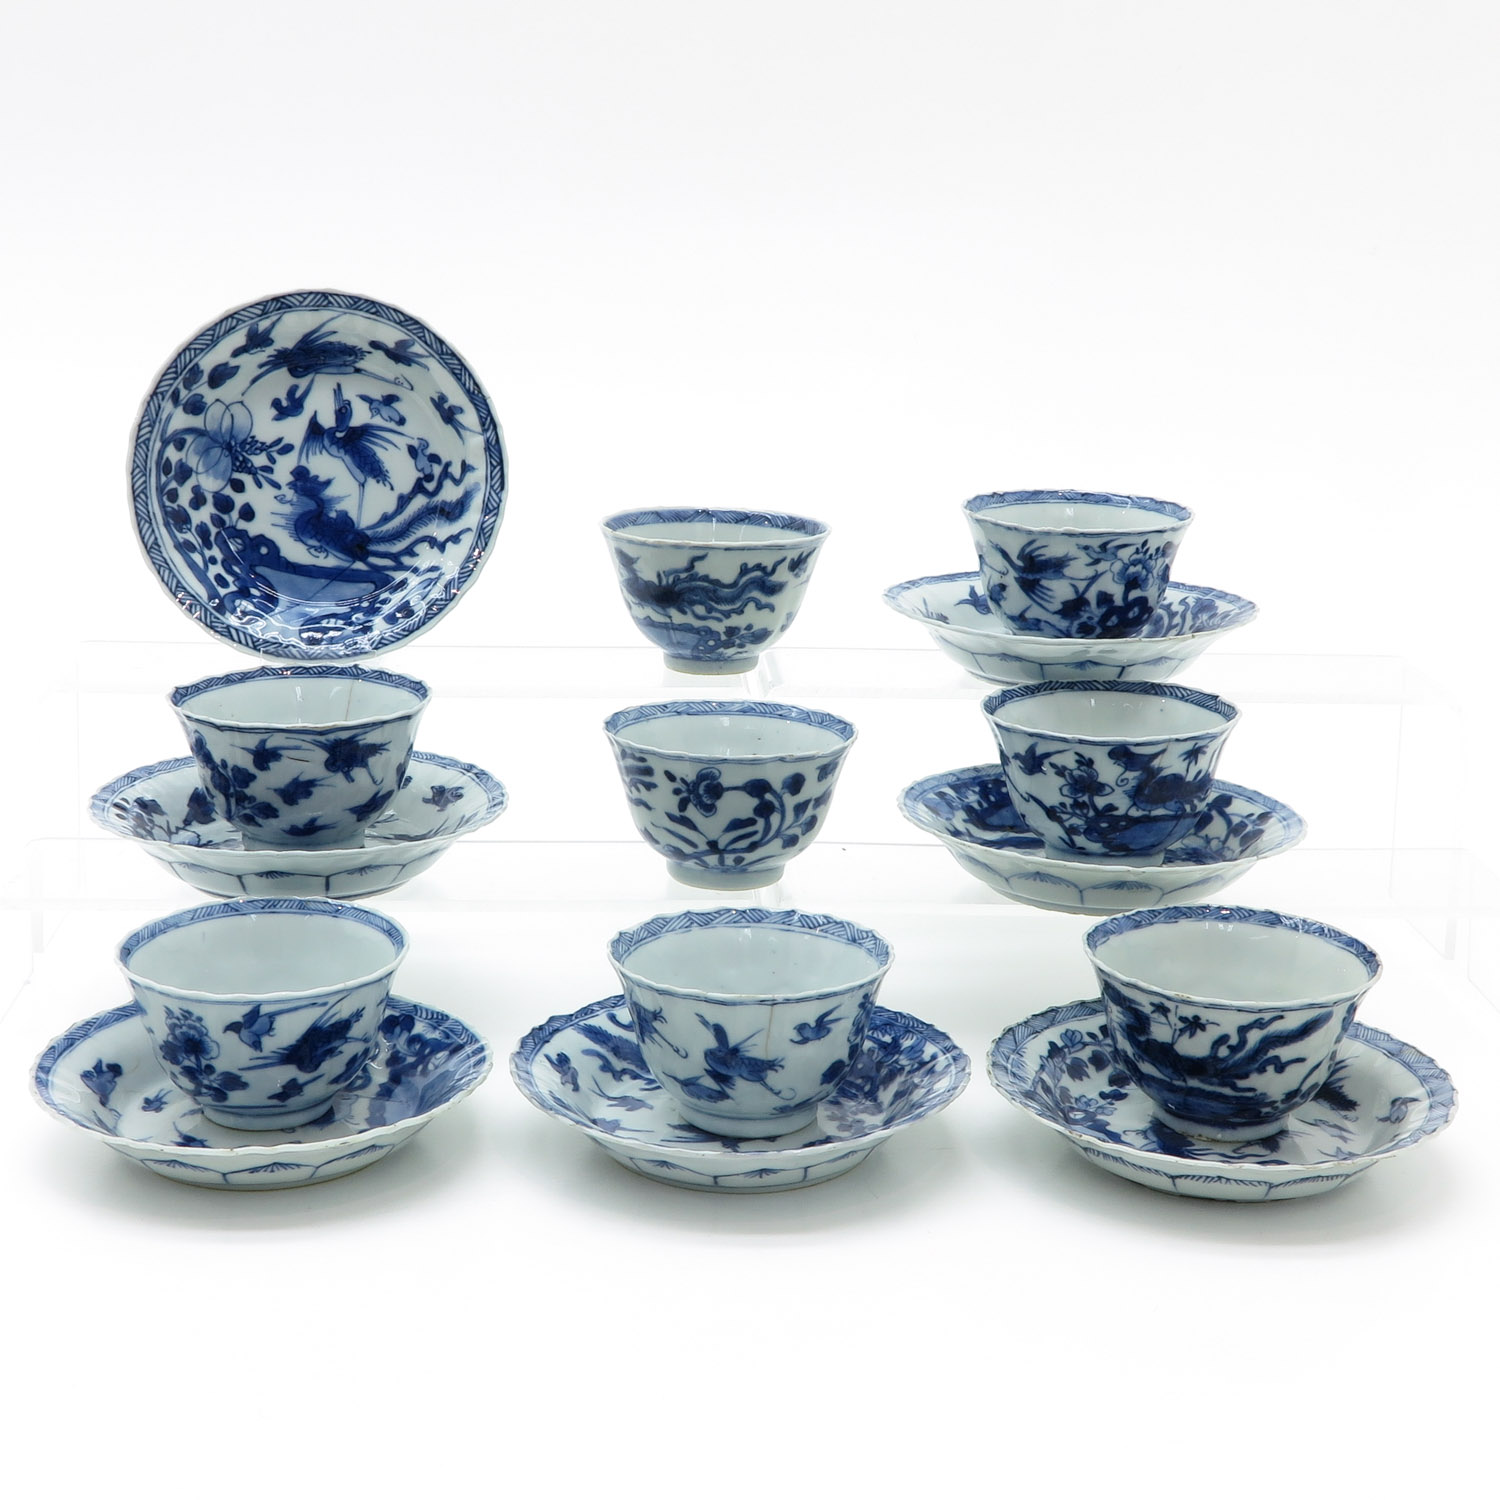 A Series of Cups and Saucers - Image 4 of 8